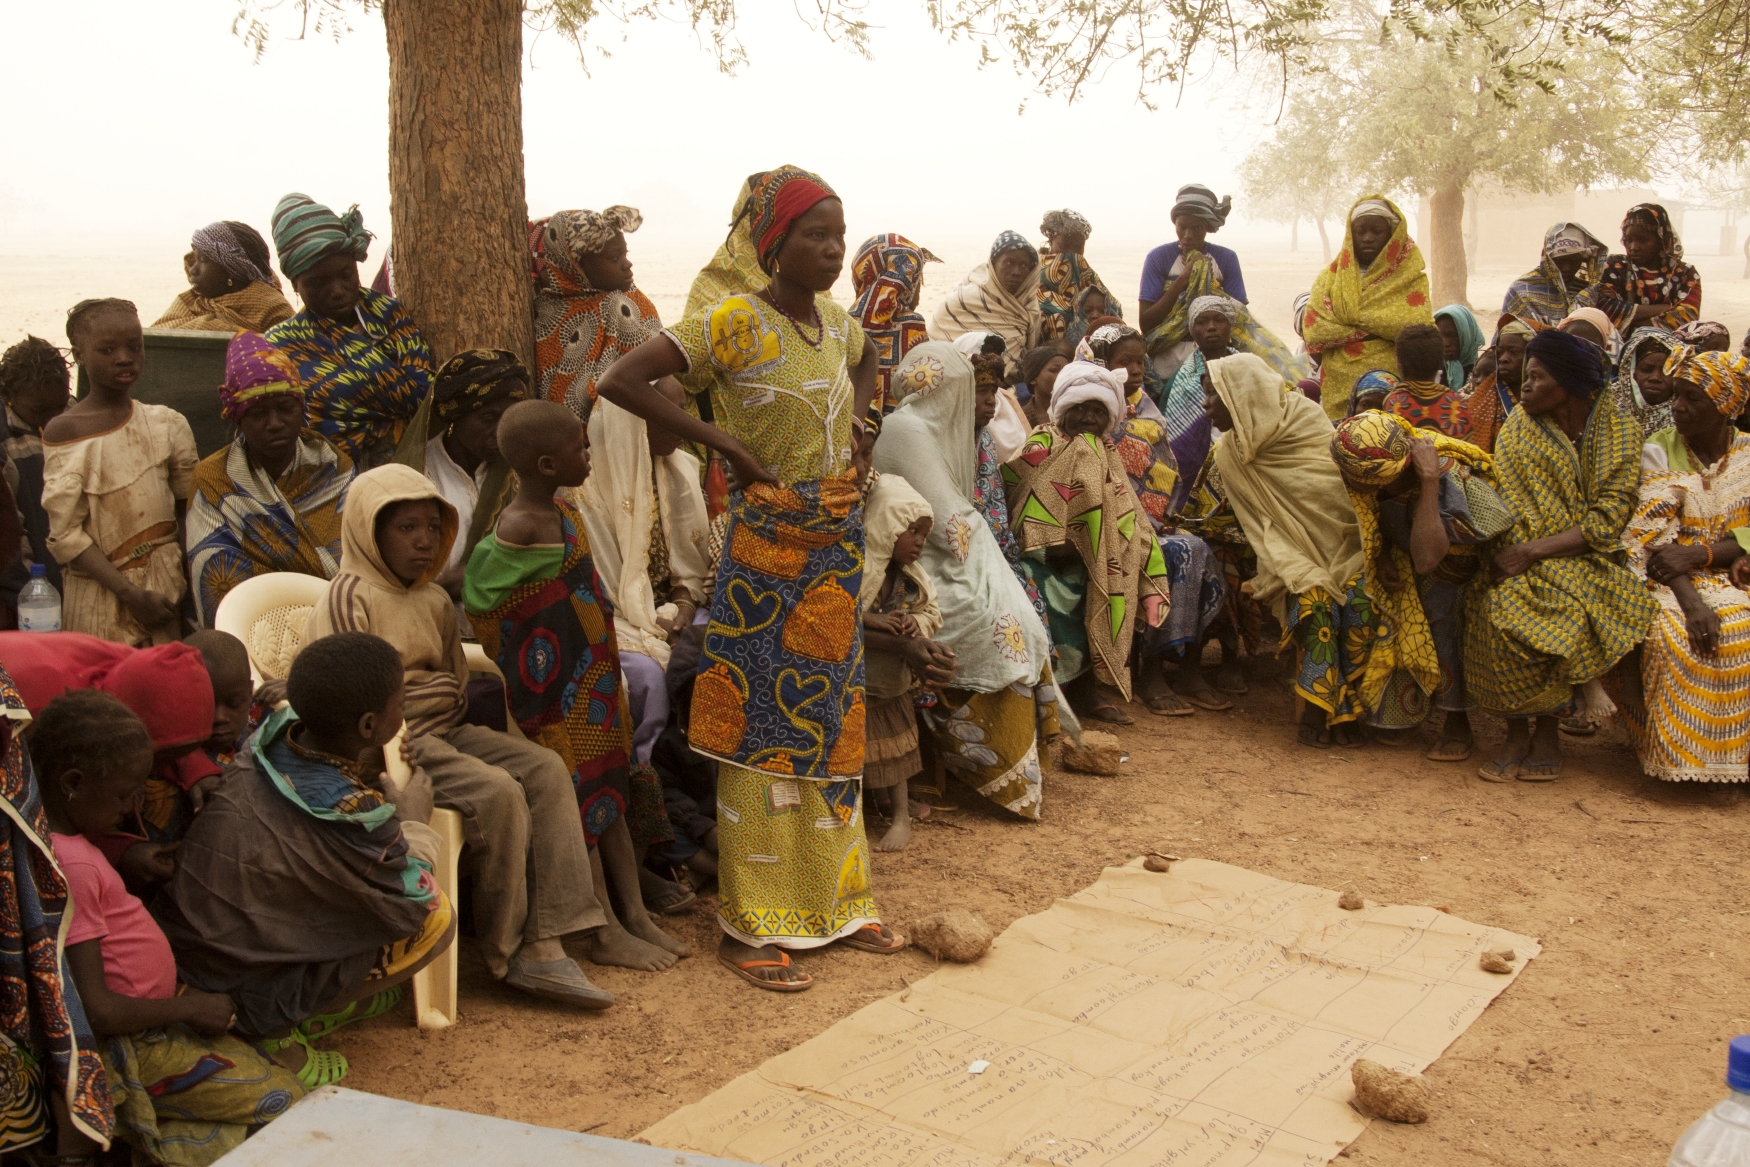 A community-led risk assessment process provides women the opportunity to have an equal voice in the community